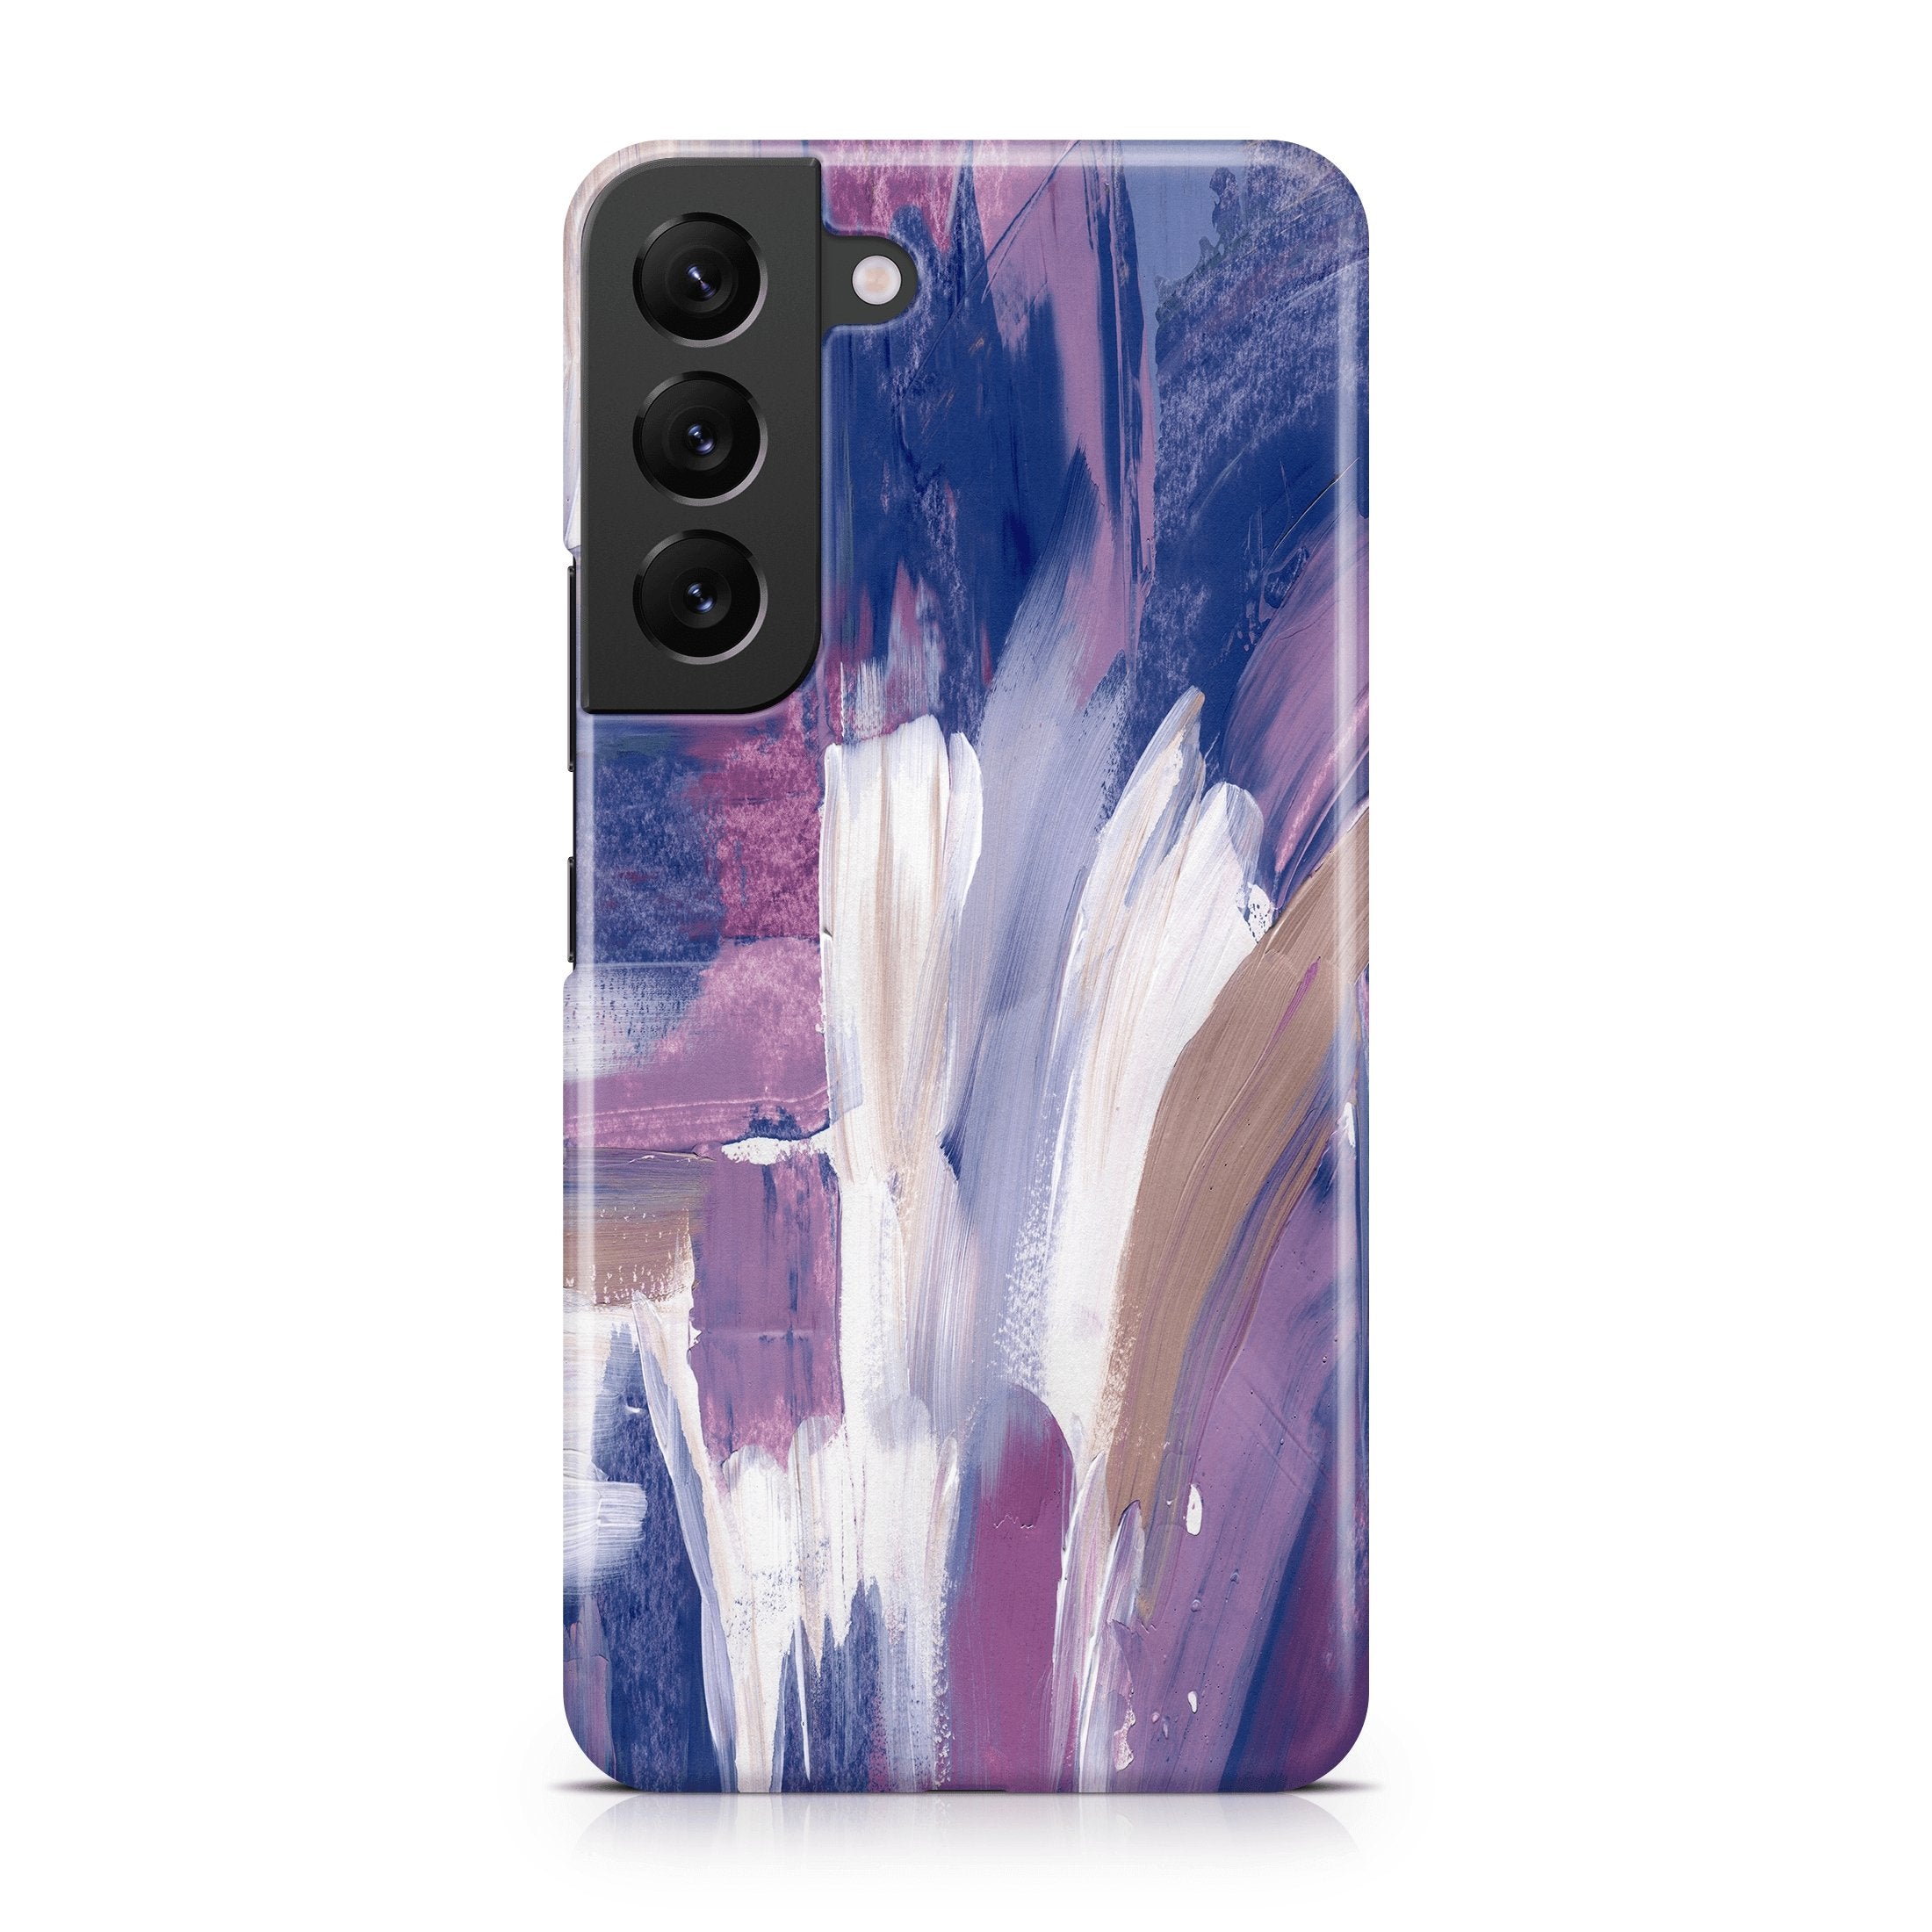 Makeup Blender I - Samsung phone case designs by CaseSwagger 